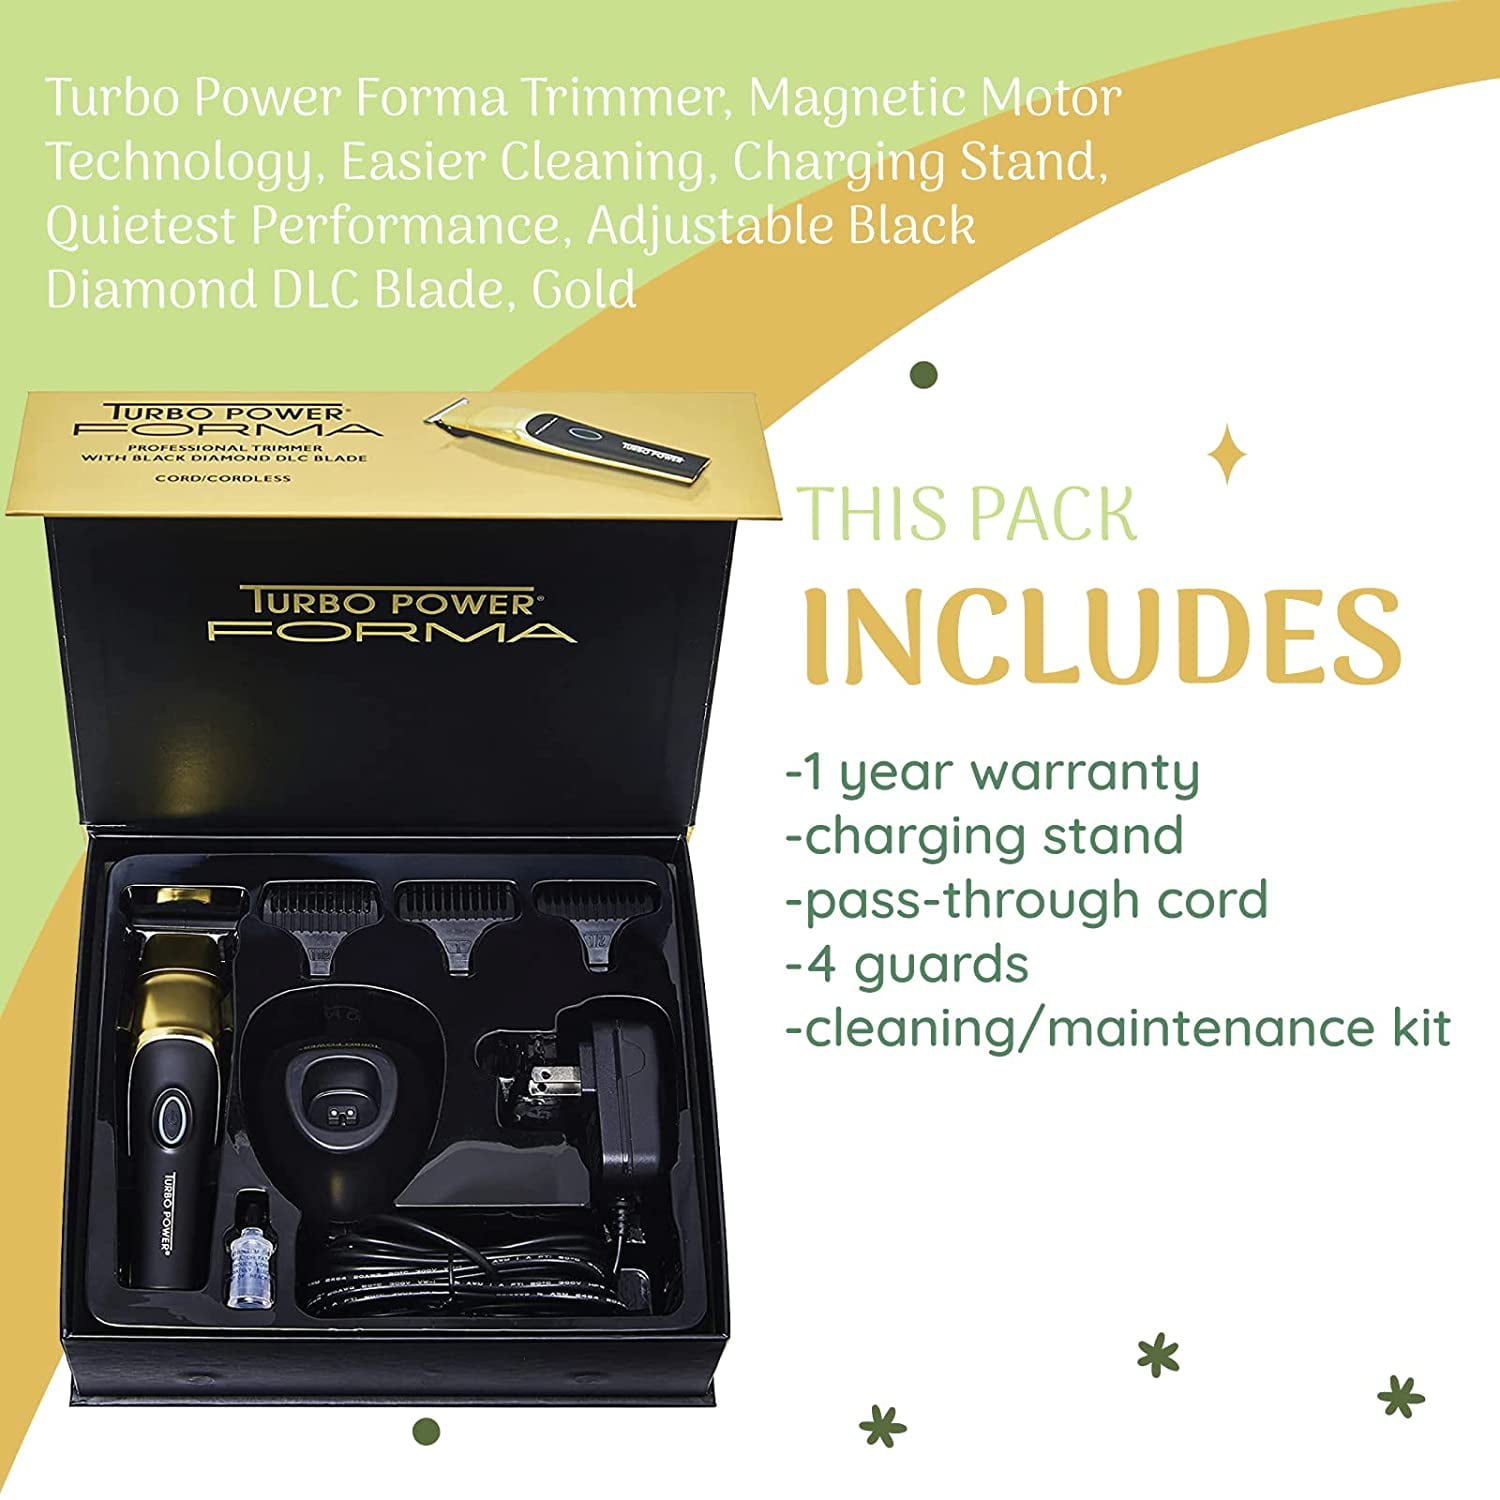 Turbo Power Forma Trimmer, Magnetic Motor Technology, Easier Cleaning,  Charging Stand, Quietest Performance, Adjustable Black Diamond DLC Blade,  Gold